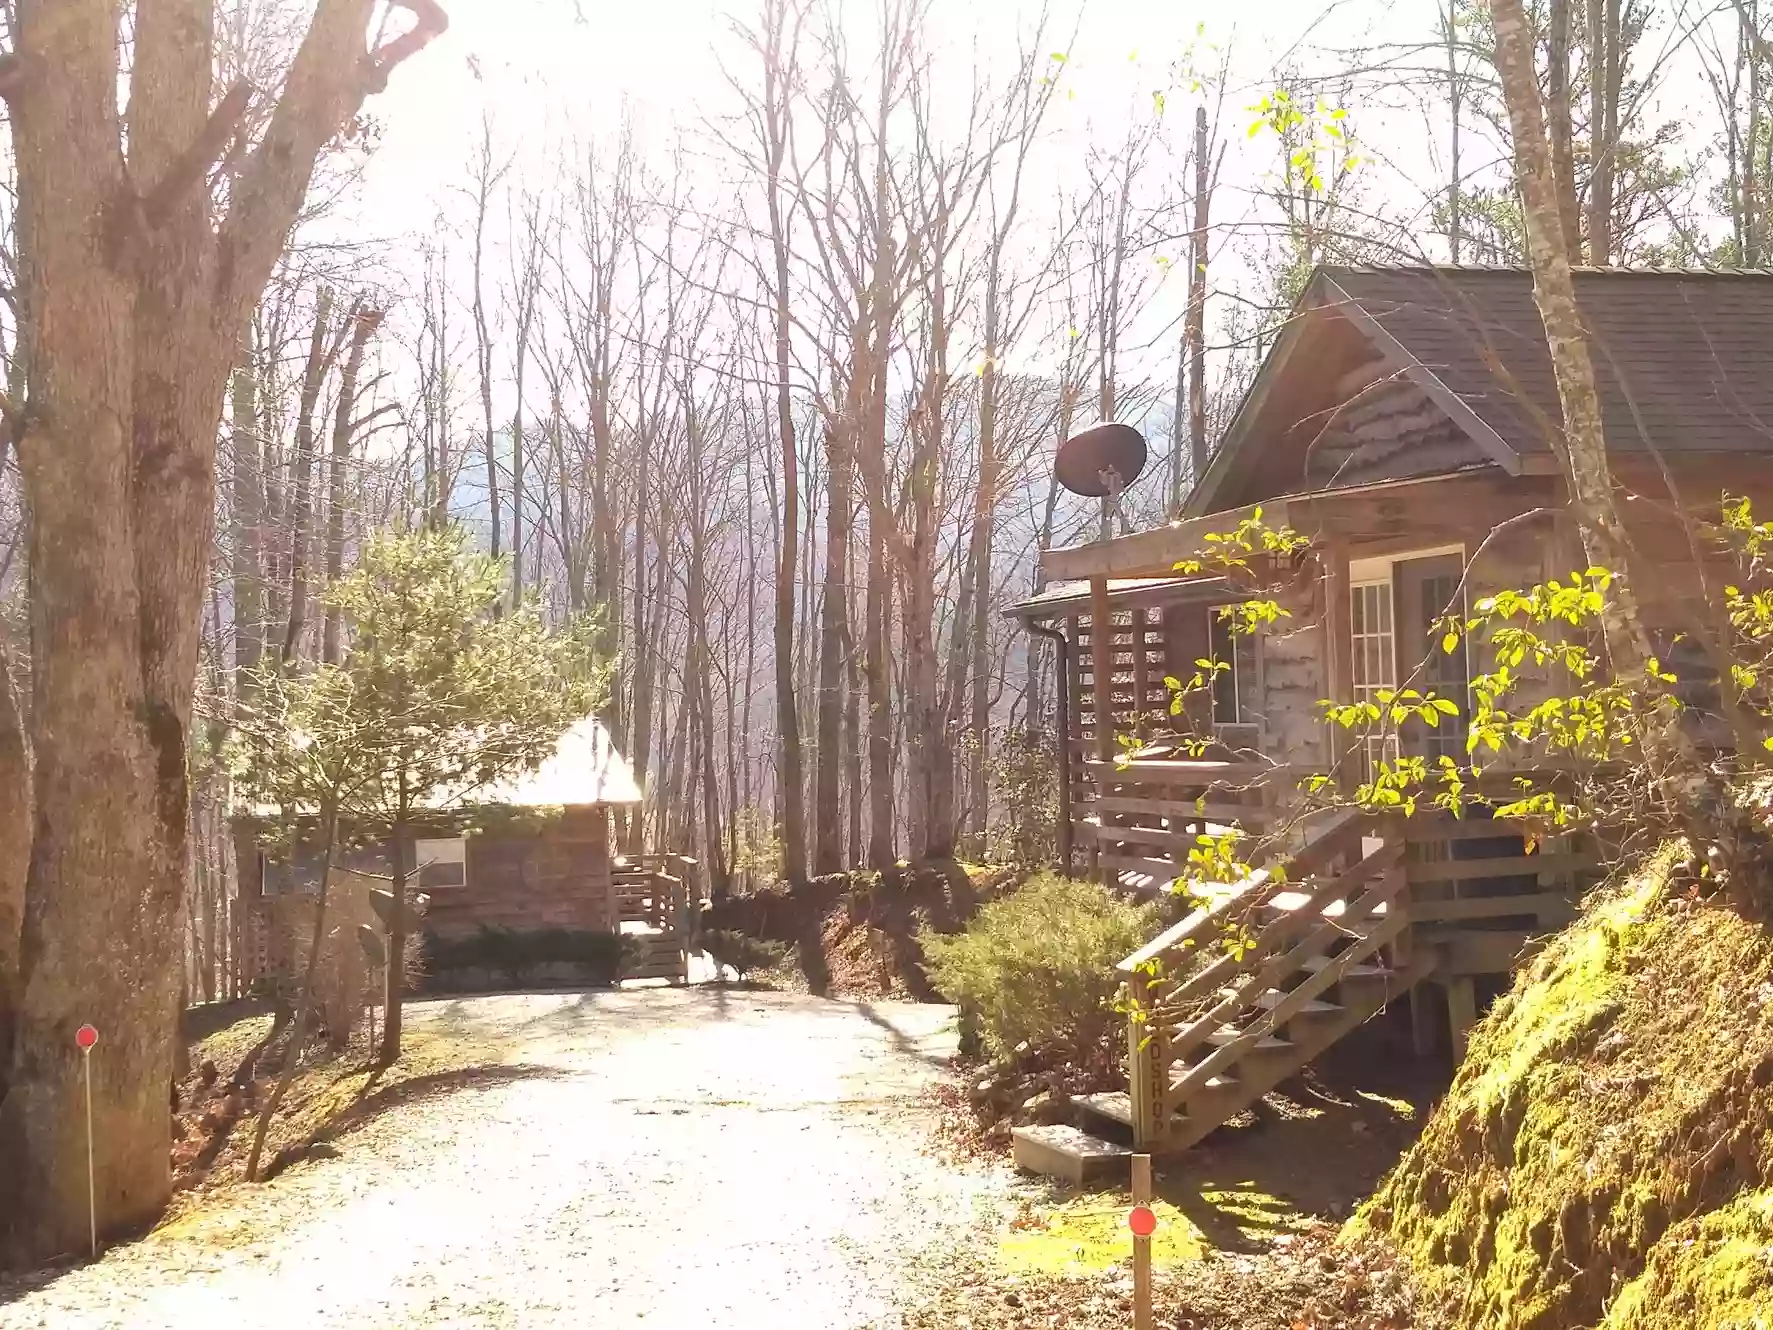 The Cabins in The Woods